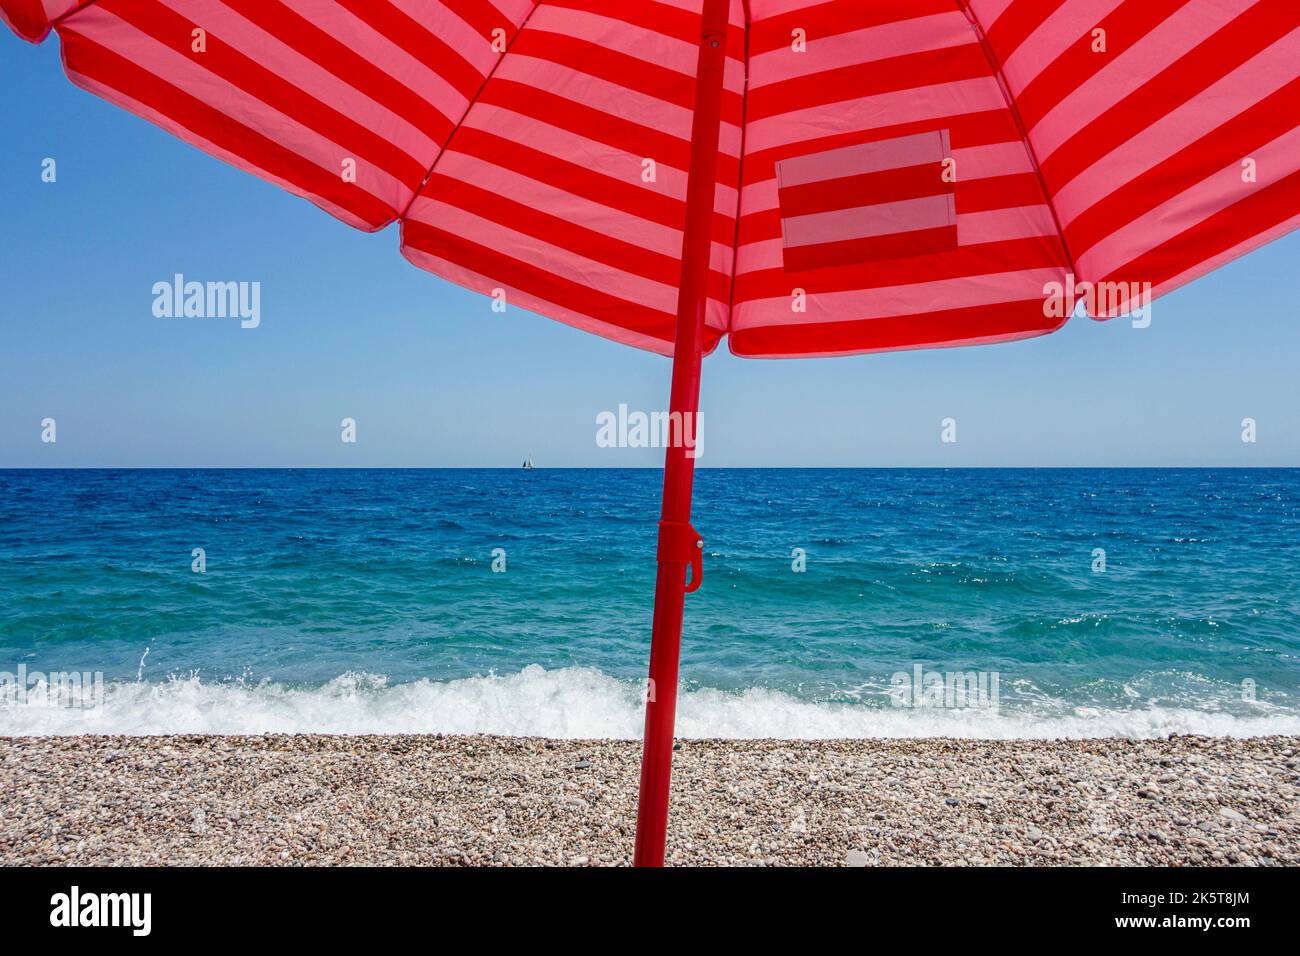 Blue sea, blue sky and a red umbrella - the summertime view from the beach at Fondachello, near Catania, Sicily, Italy Stock Photo